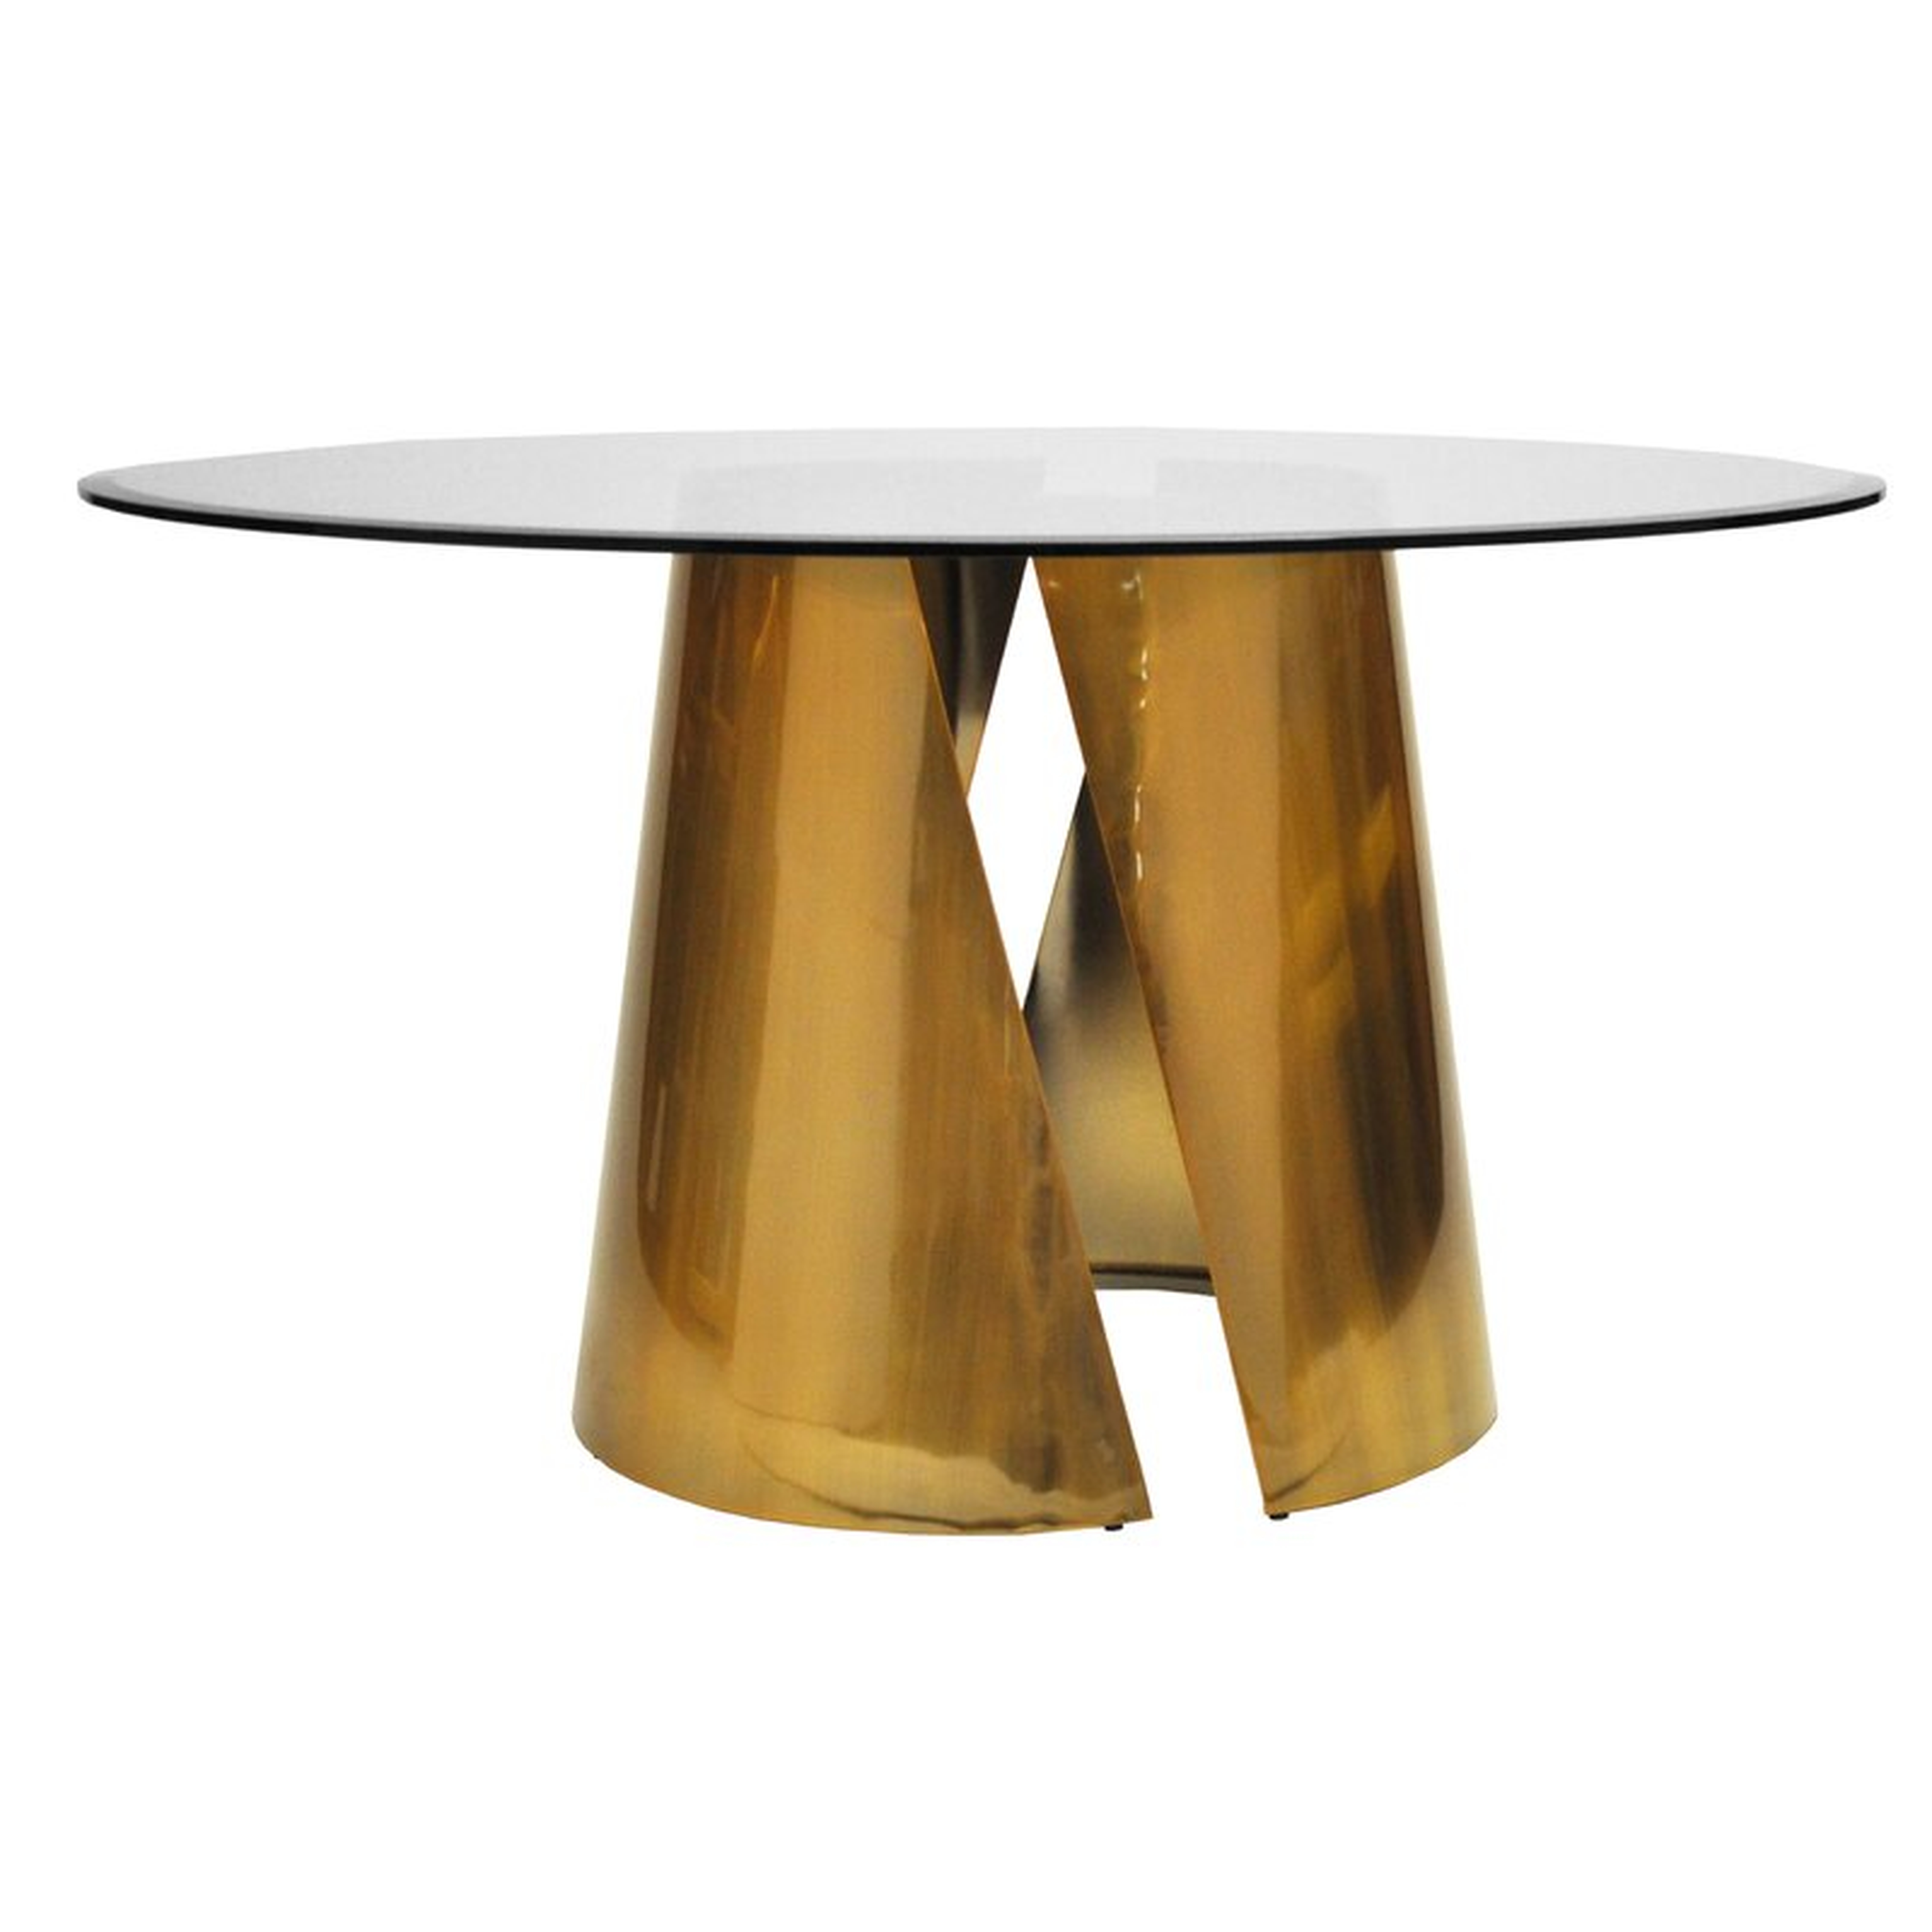 Worlds Away Dining Table Color: Antique Brass, Size: 30" H x 48" L x 48" W, Table Base Color: Antique Brass - Perigold